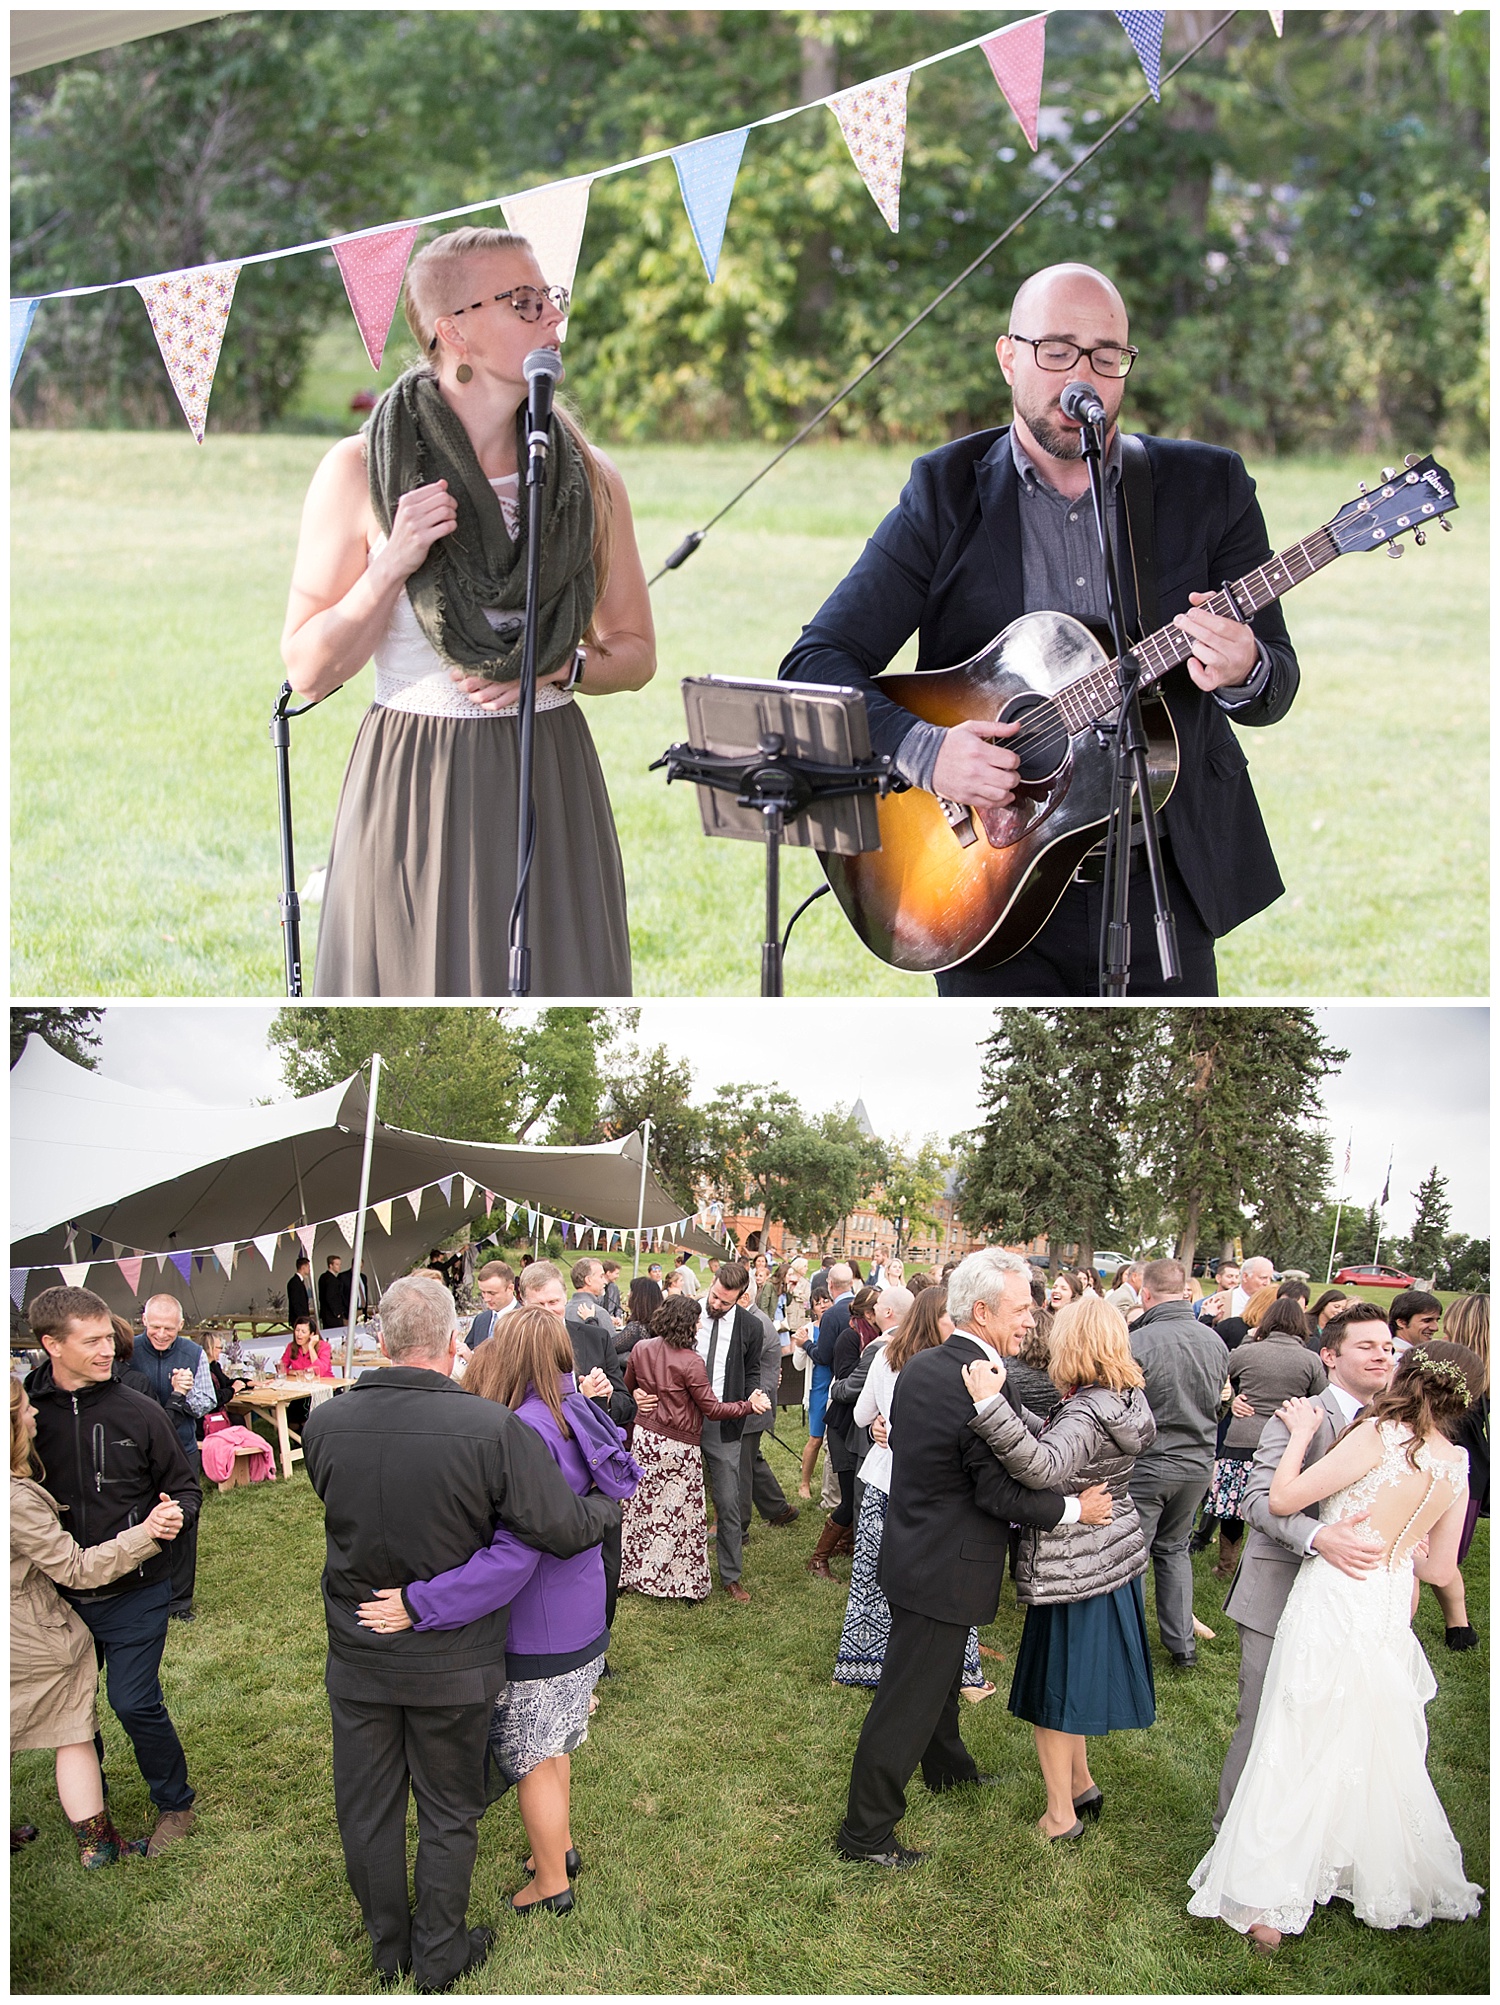 Live Music and Dancing in the Grass | Bethany and Jono's Intimate DIY Wedding | Colorado Springs Wedding Photographer | Farm Wedding Photographer | Apollo Fields Wedding Photojournalism